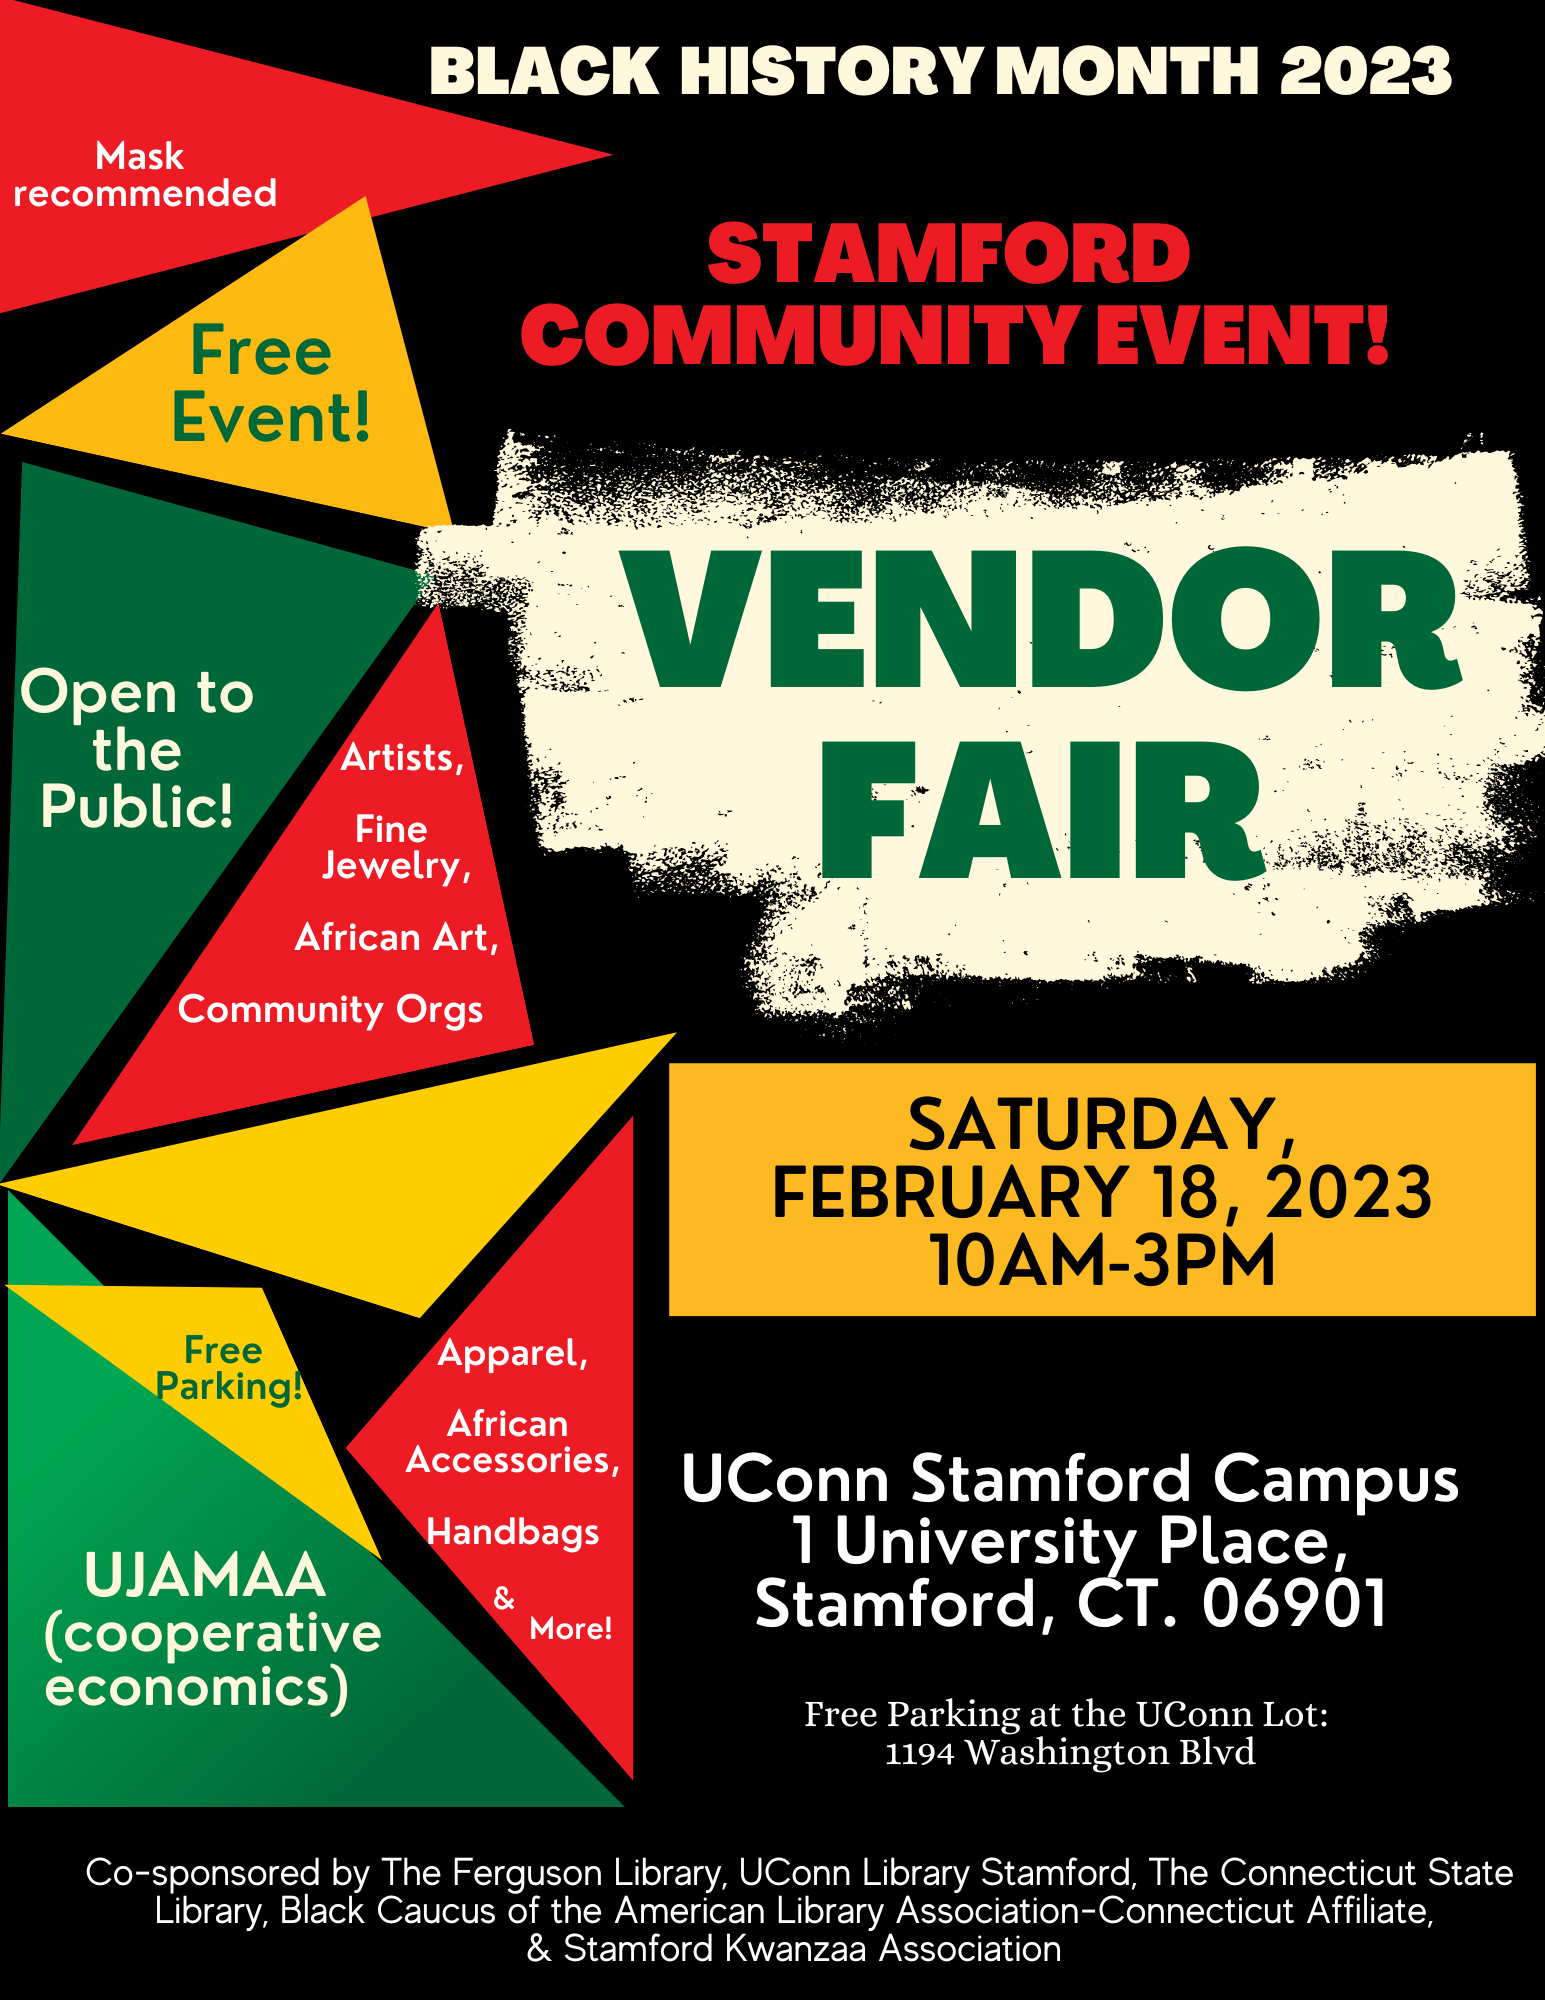 Stamford Community Event - Vendor Fair at UConn Stamford for Black History Month 2023. Saturday, February 18, 2023 from 10am-3pm. 